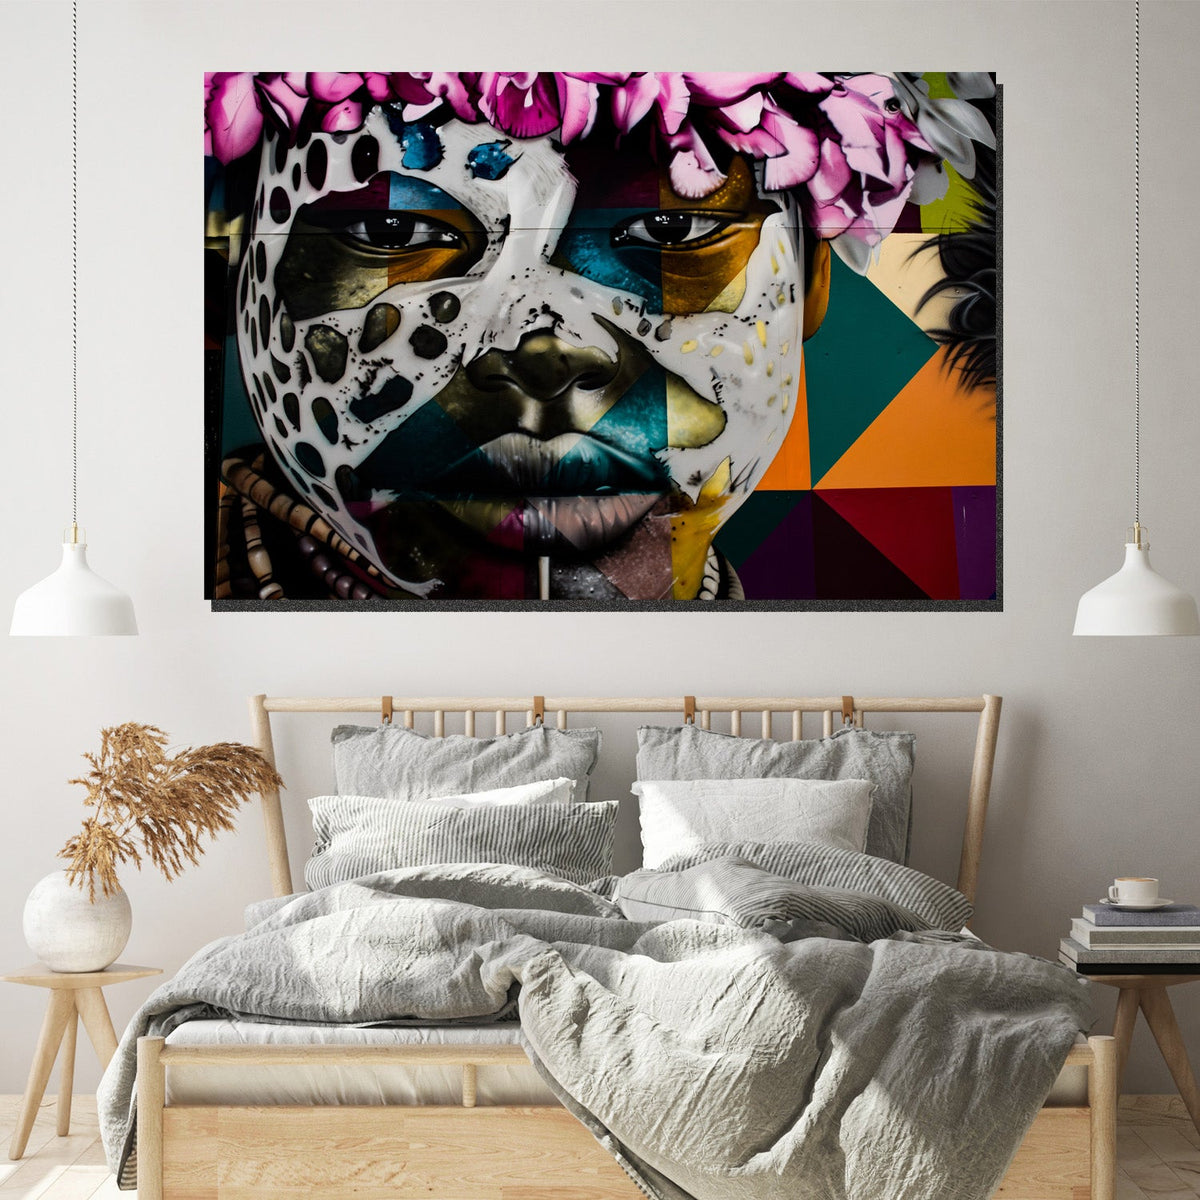 https://cdn.shopify.com/s/files/1/0387/9986/8044/products/AfricanBoyCanvasArtPrintStretched-2.jpg